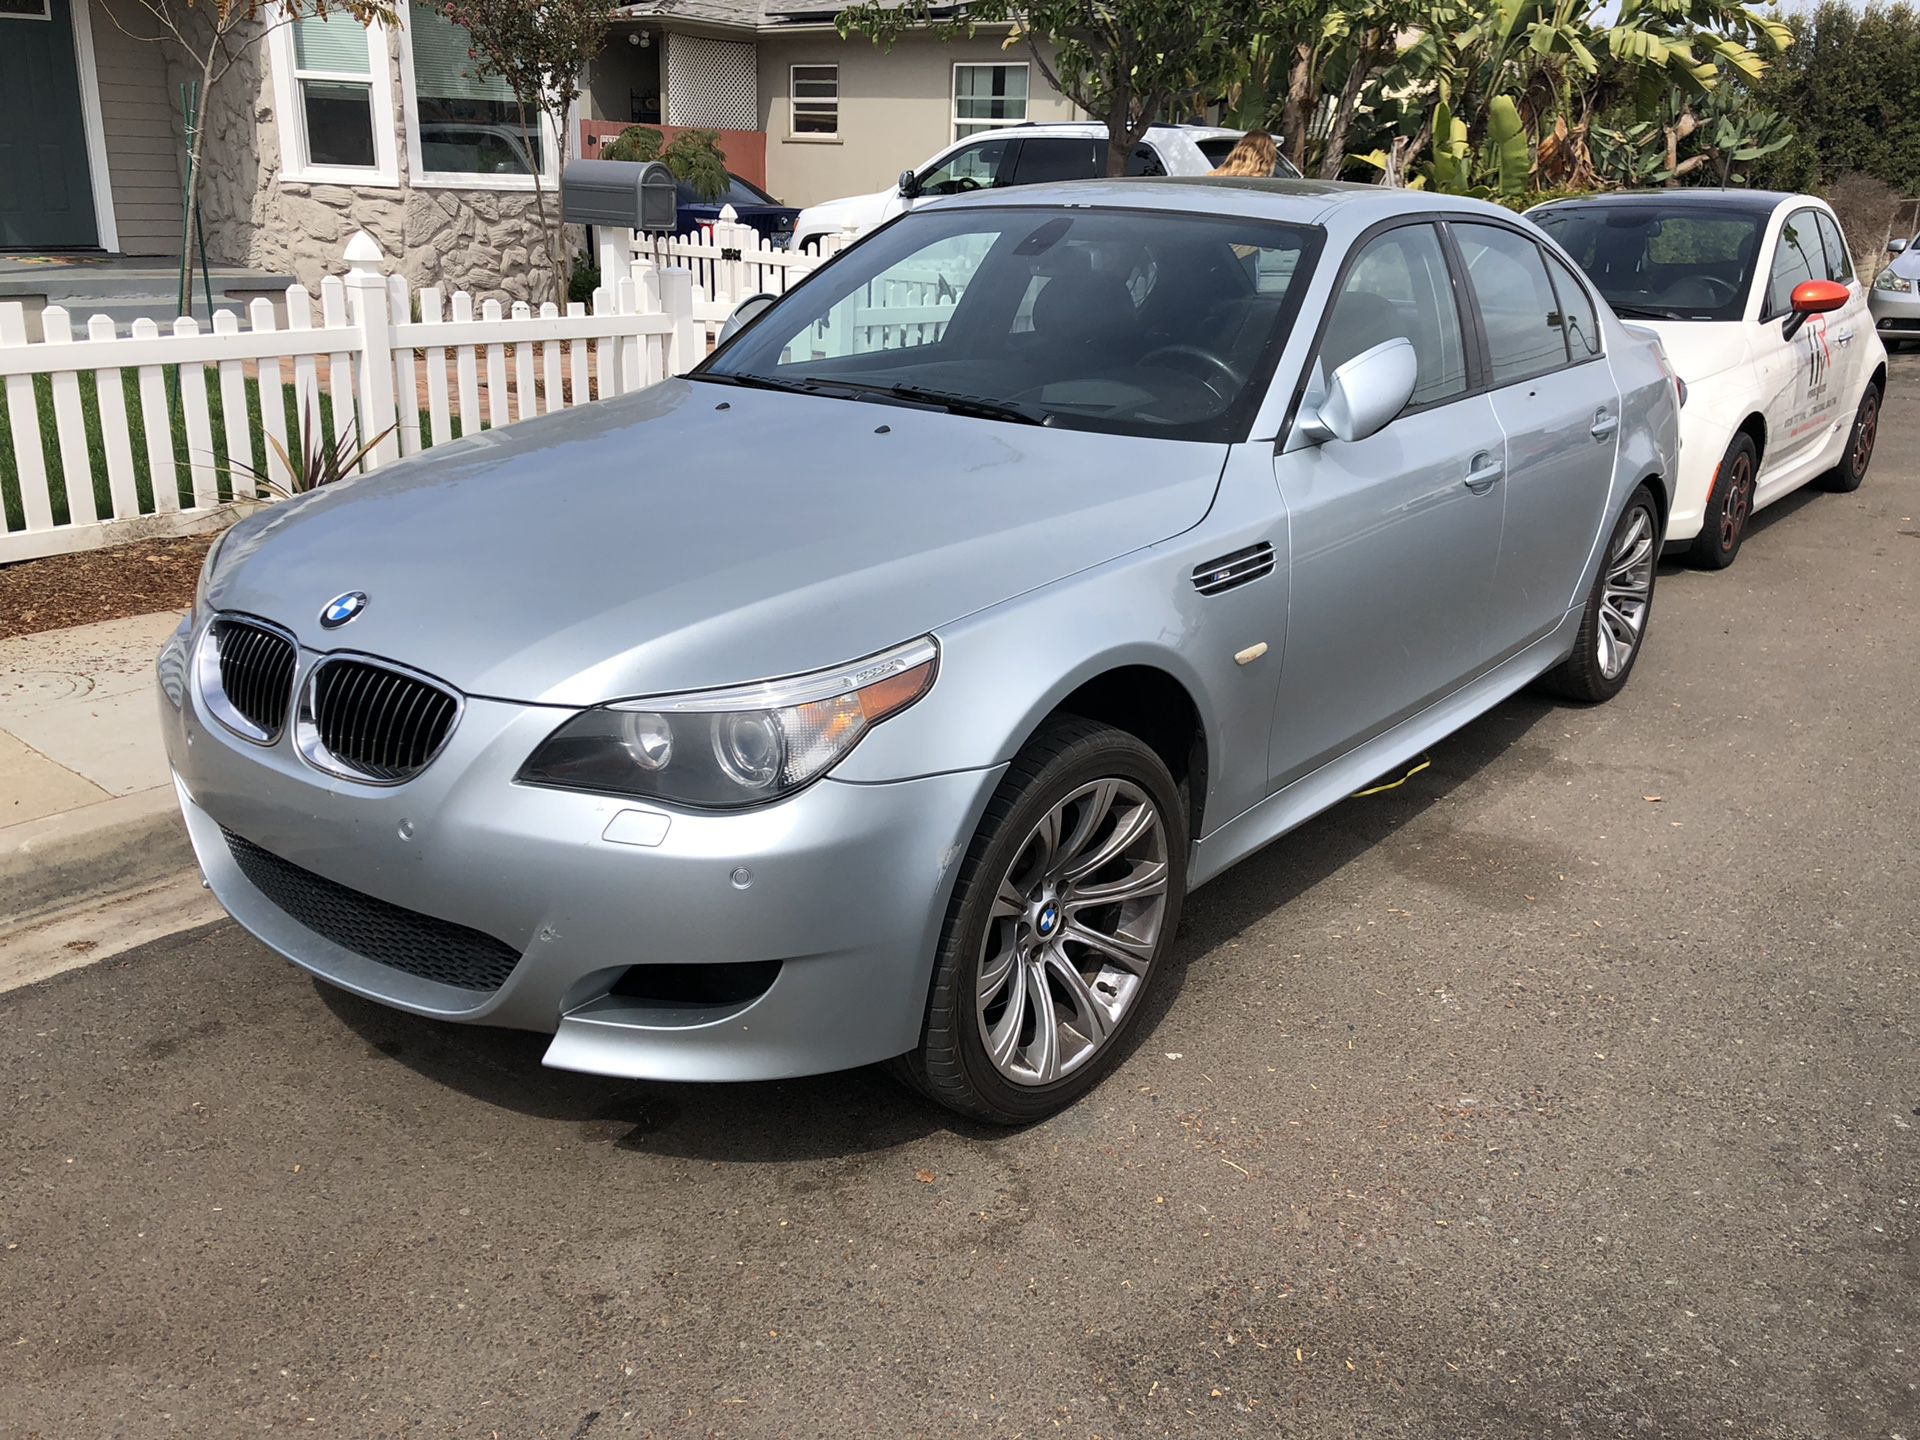 2006 Bmw e60 M5 parting entire car call for parts needed